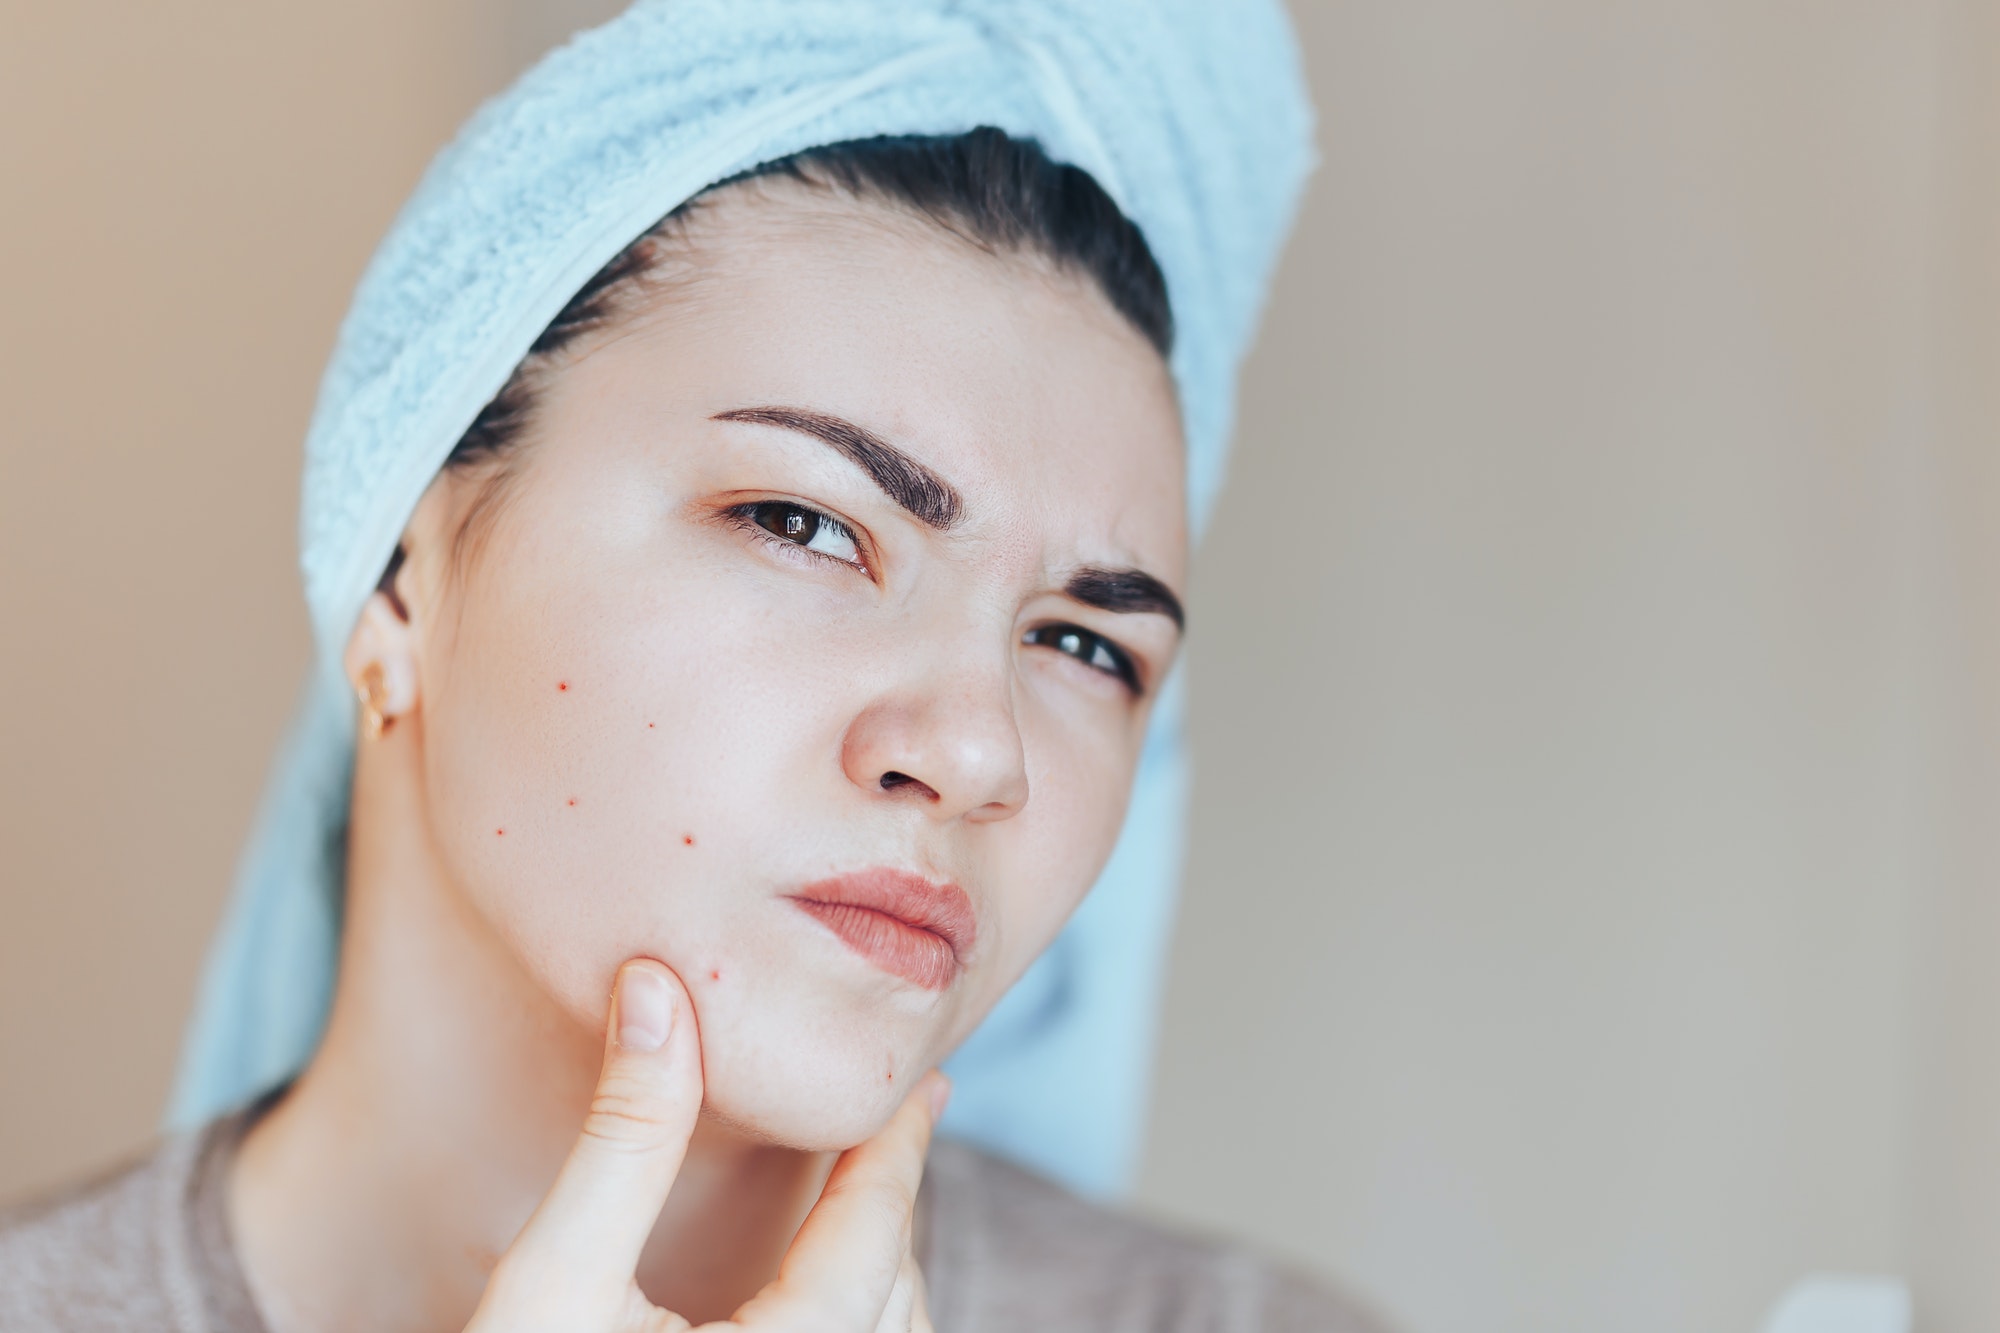 Scowling girl in shock of her acne with a towel on her head. Woman skin care concept photos of ugly